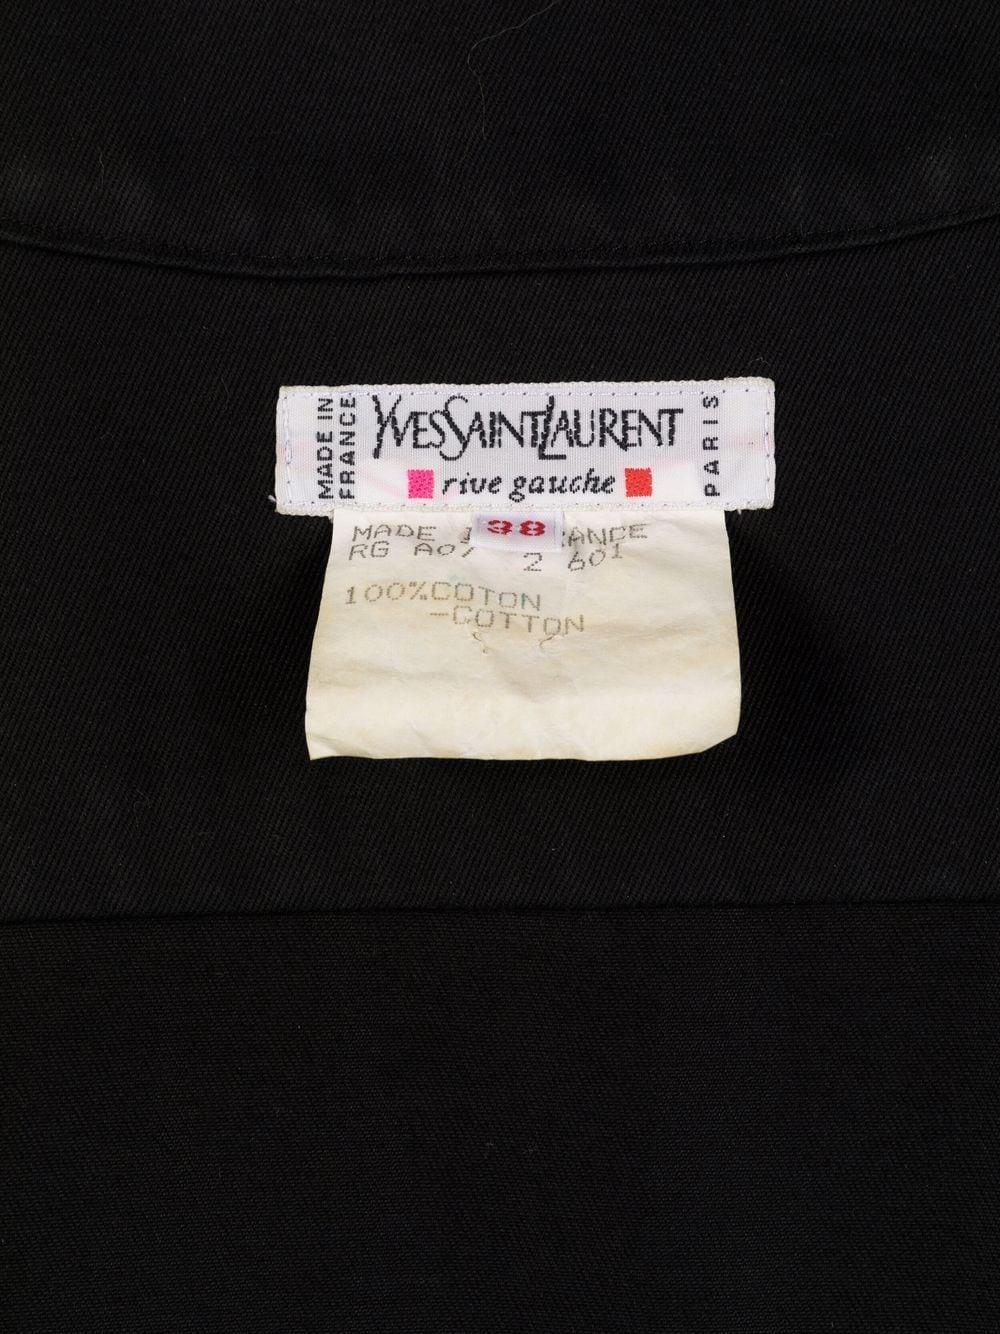 1990s Yves Saint Laurent  black safari cotton dress featuring a front and side lace-up detailing, turn-up cuffs, short sleeves, V-neck.
100% cotton
Estimated size Estimated size 38fr/US6 /UK10 
In good vintage condition. 
Made in France. 
We